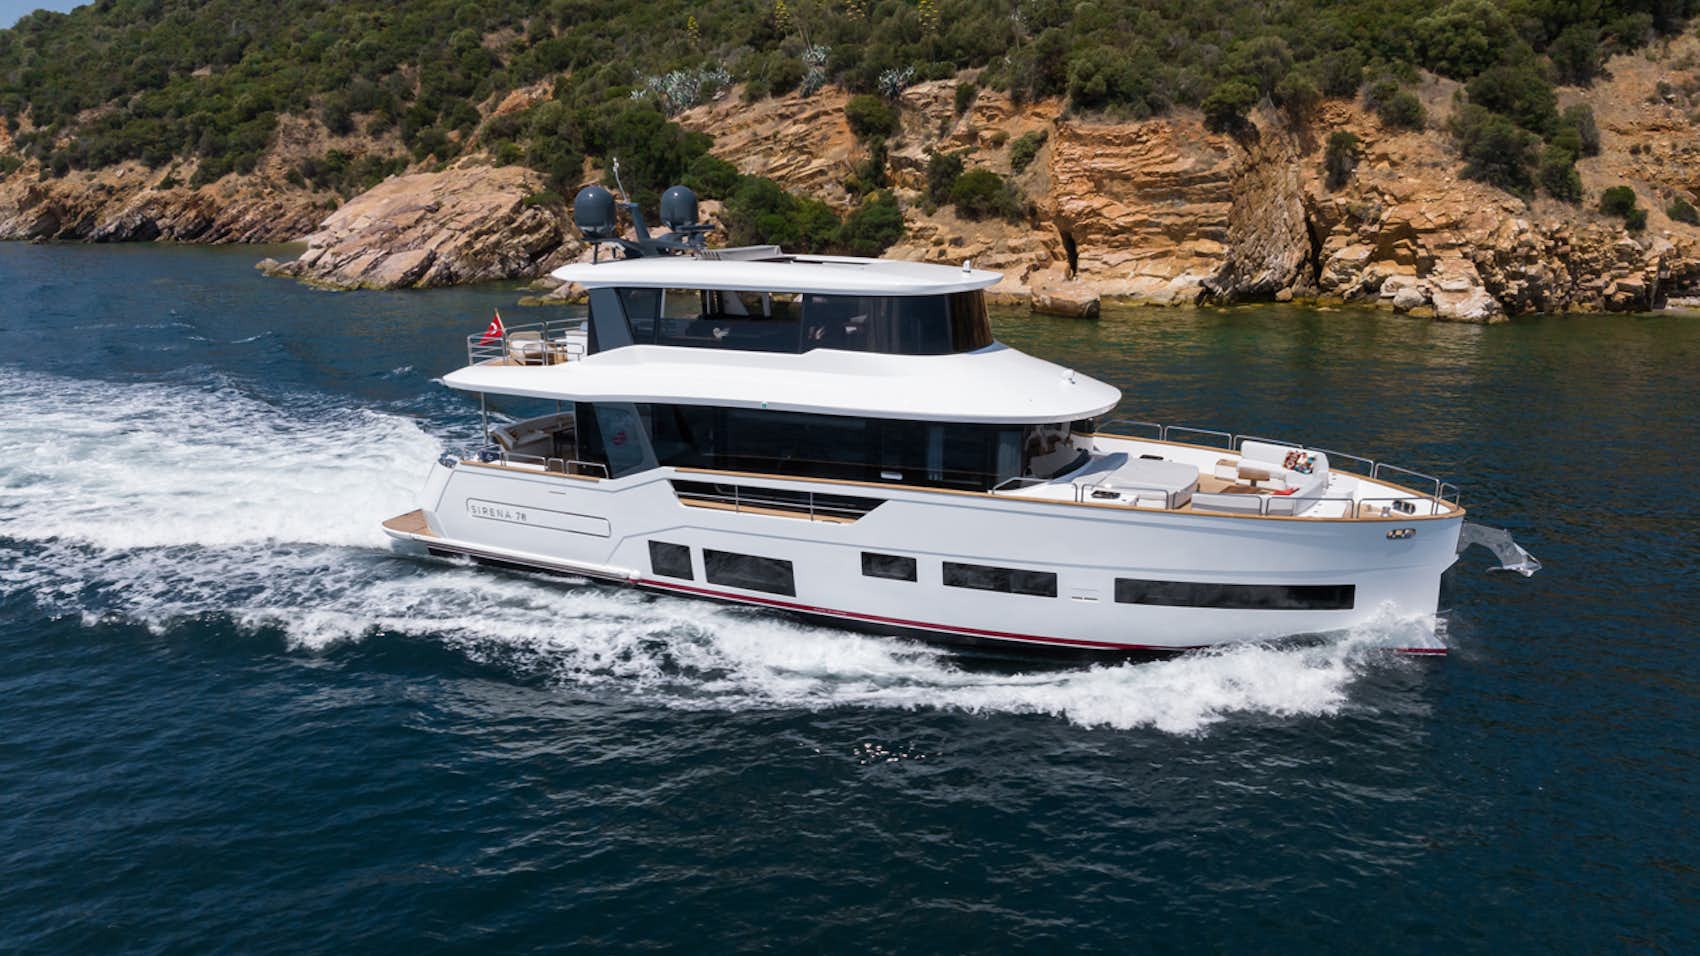 a boat on the water aboard Galene iv Yacht for Sale